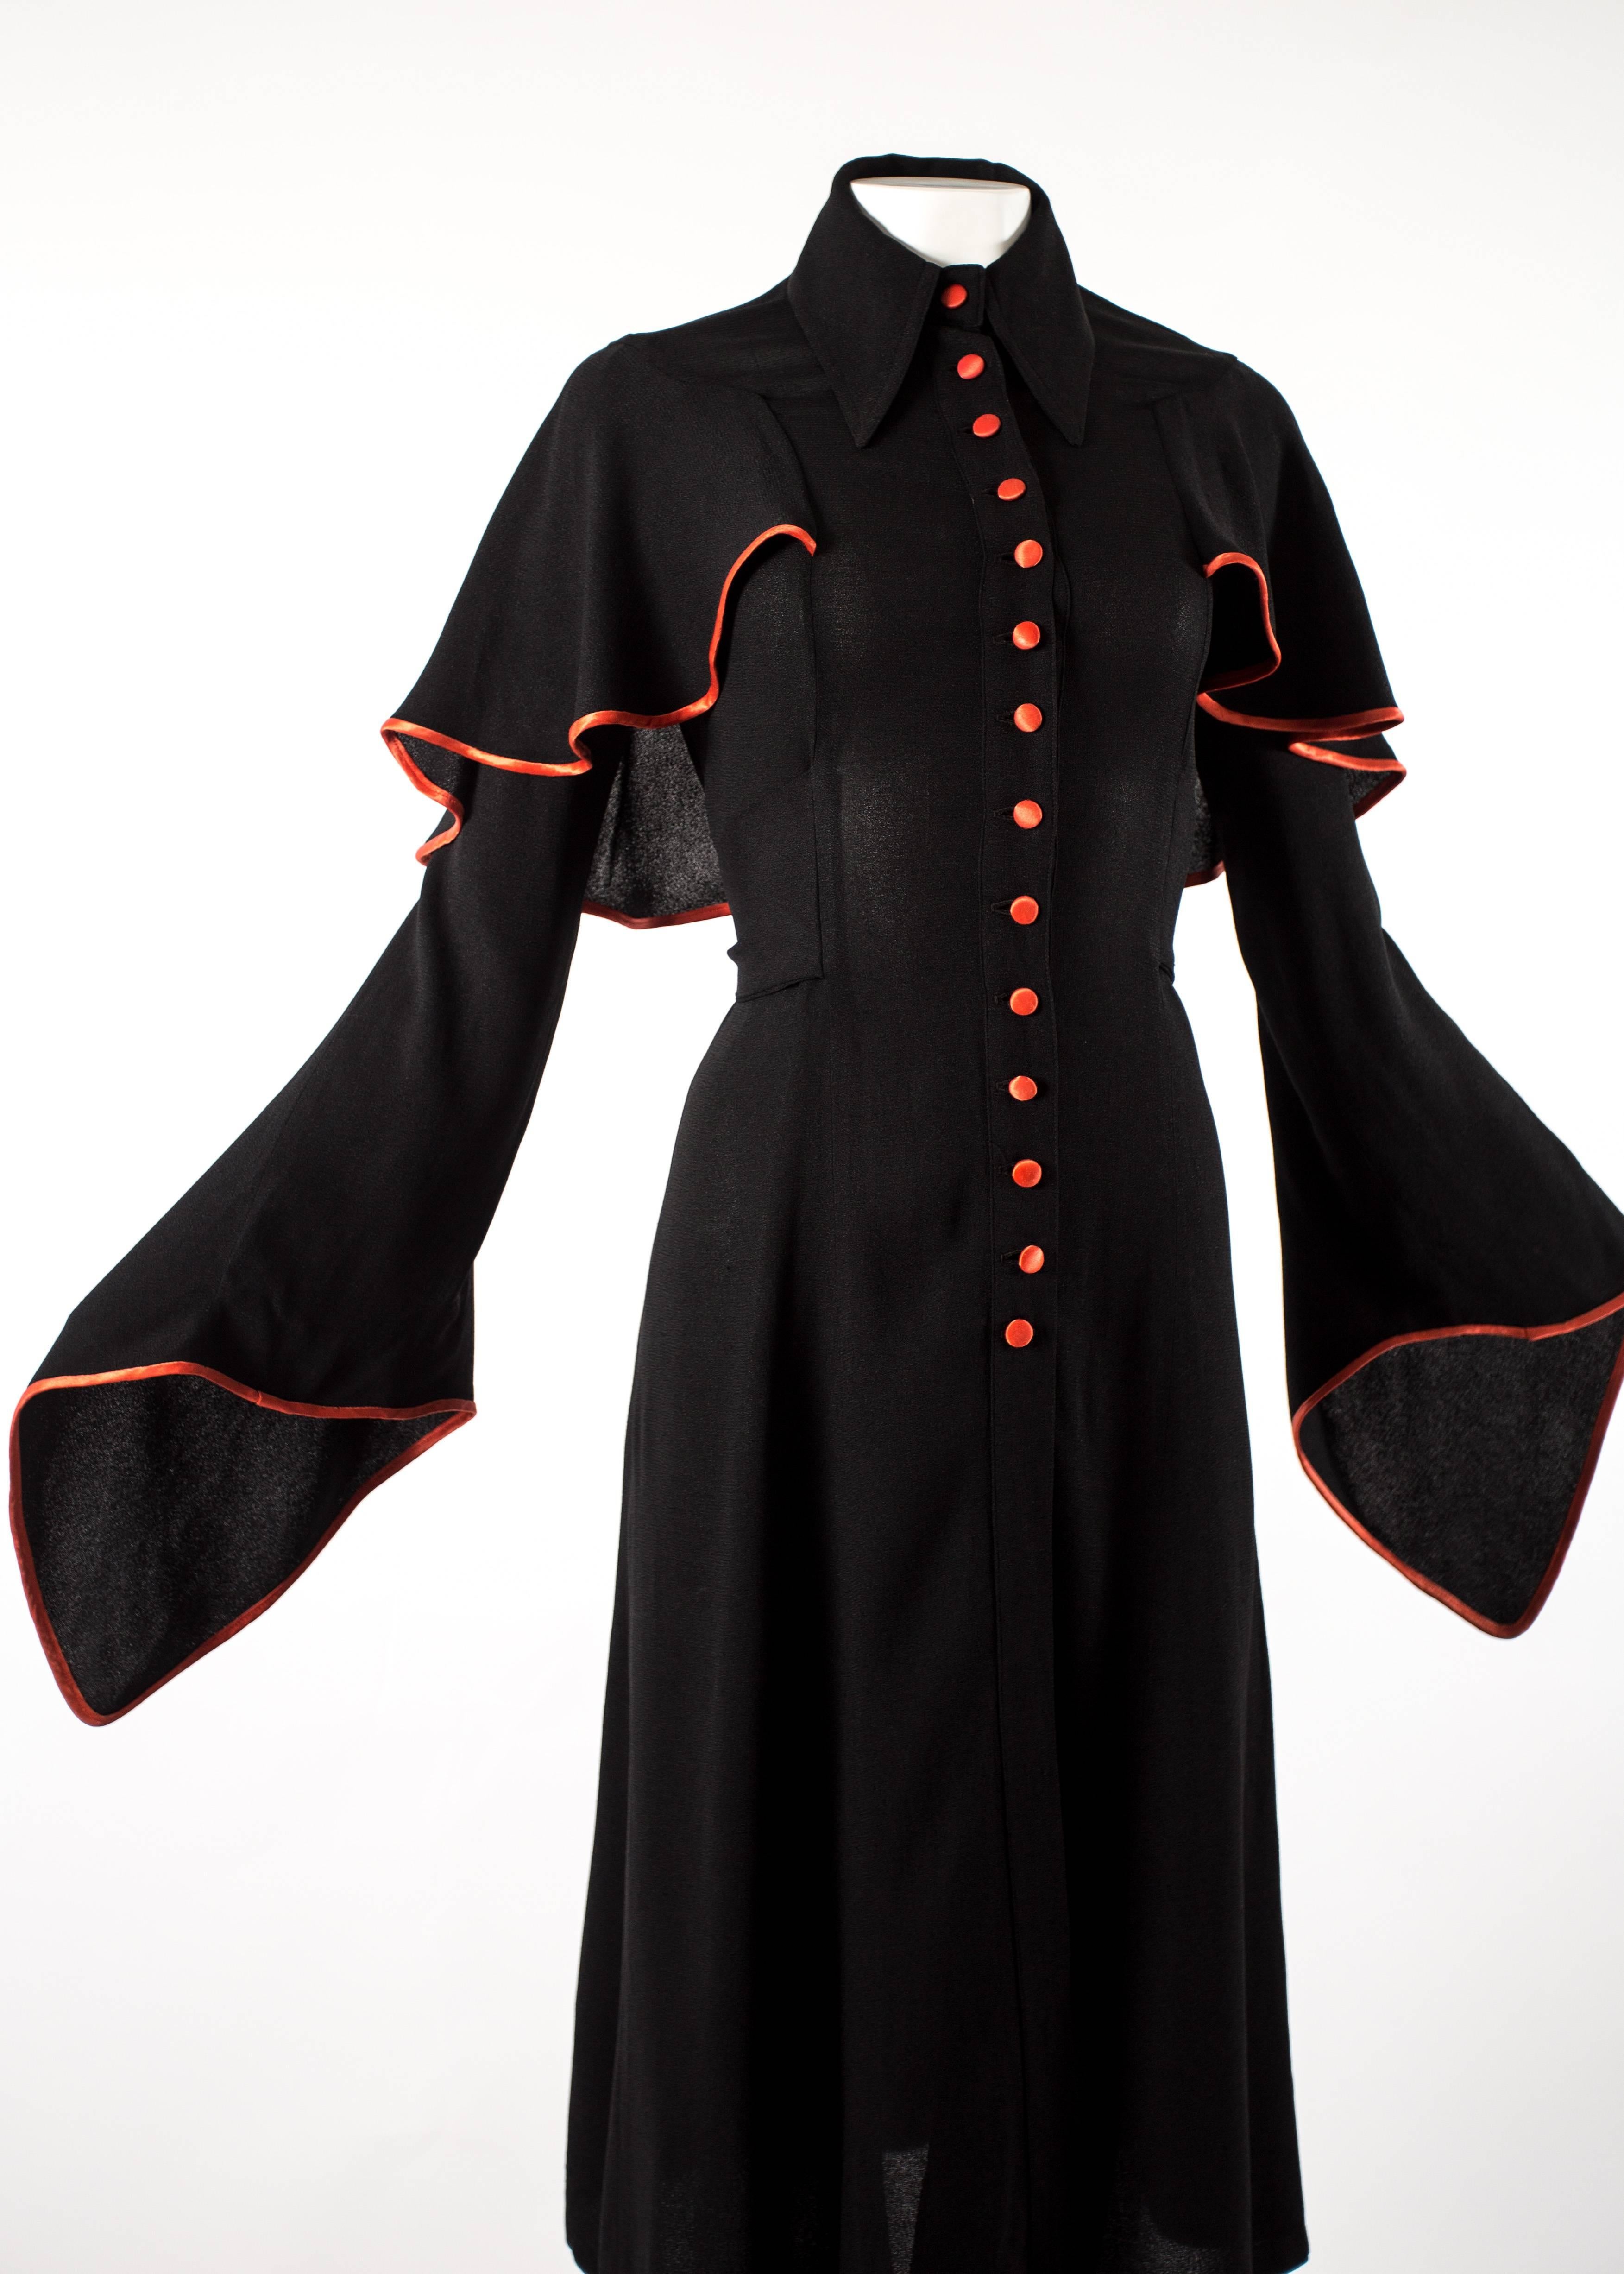 Black Ossie Clark 1970 black moss crepe mid length dress with red satin trim 